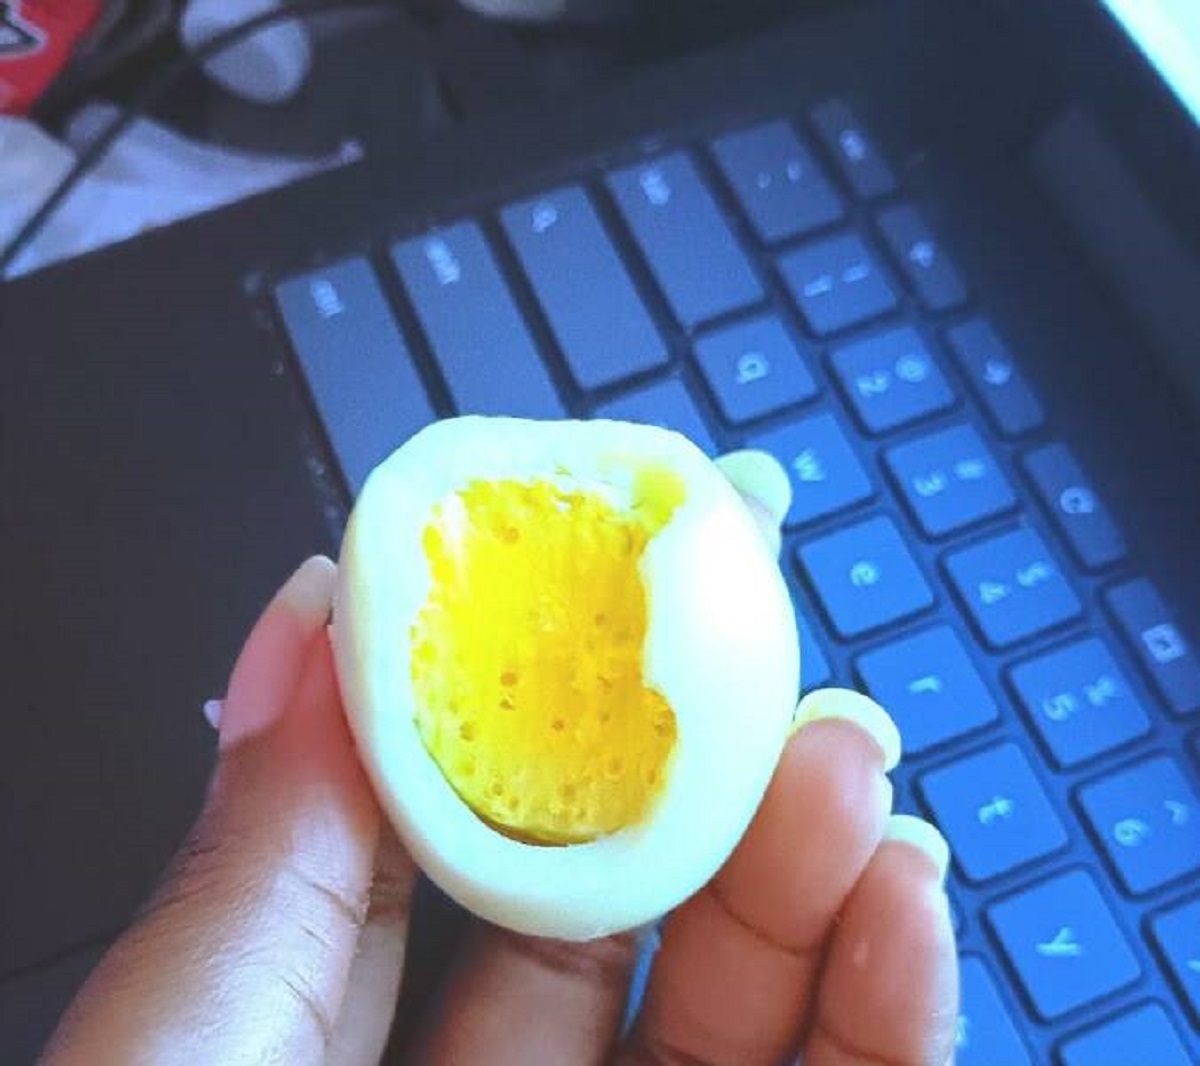 " I accidentally ate a rotten boiled egg"